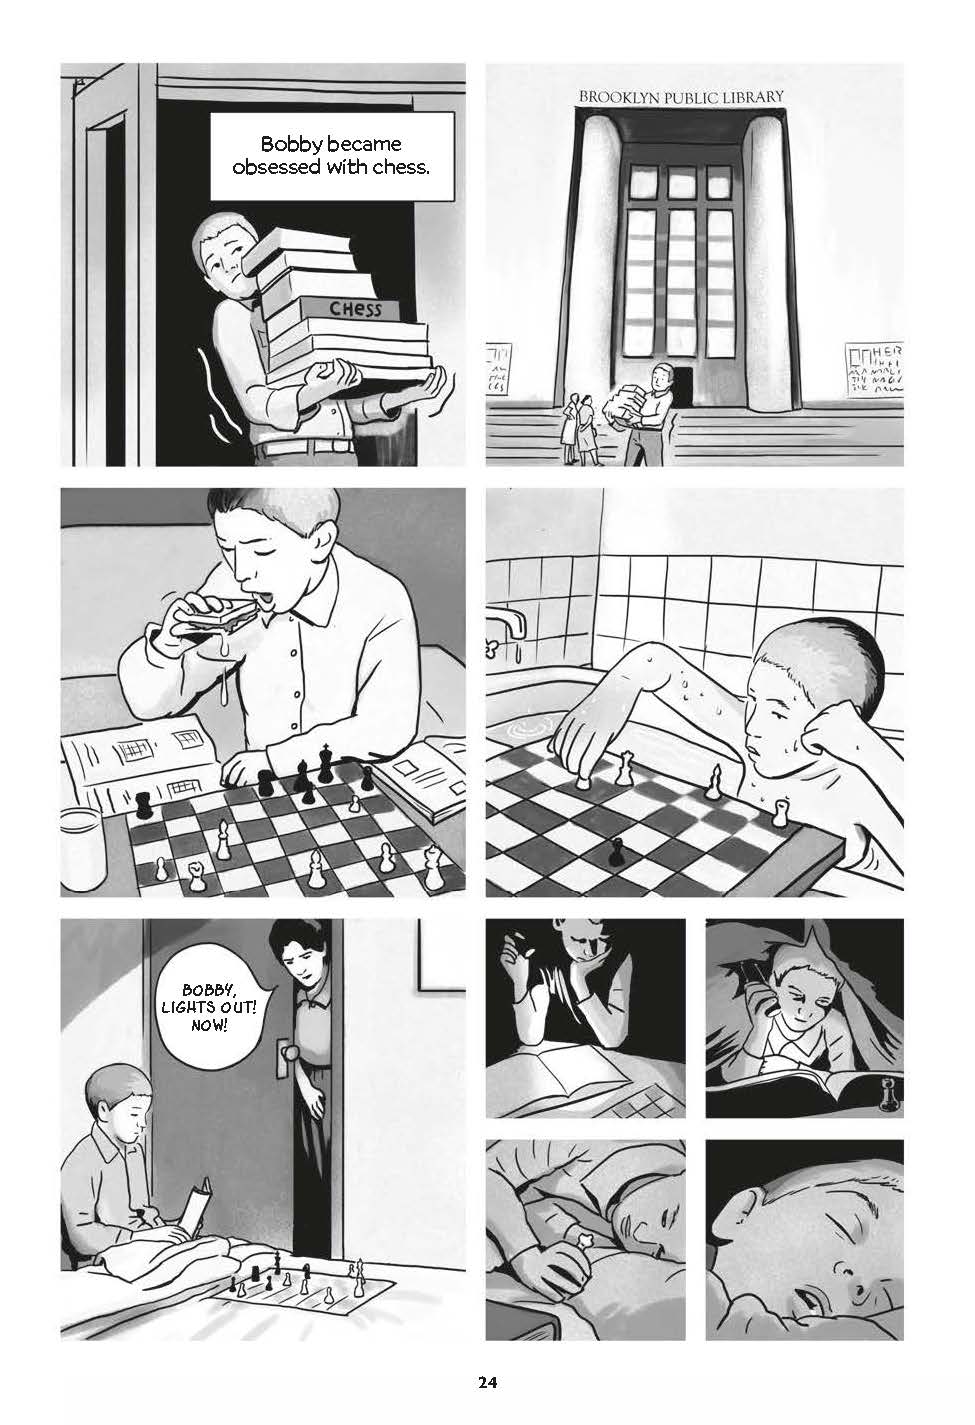 Black & White: The Rise and Fall of Bobby Fischer by Julian Voloj